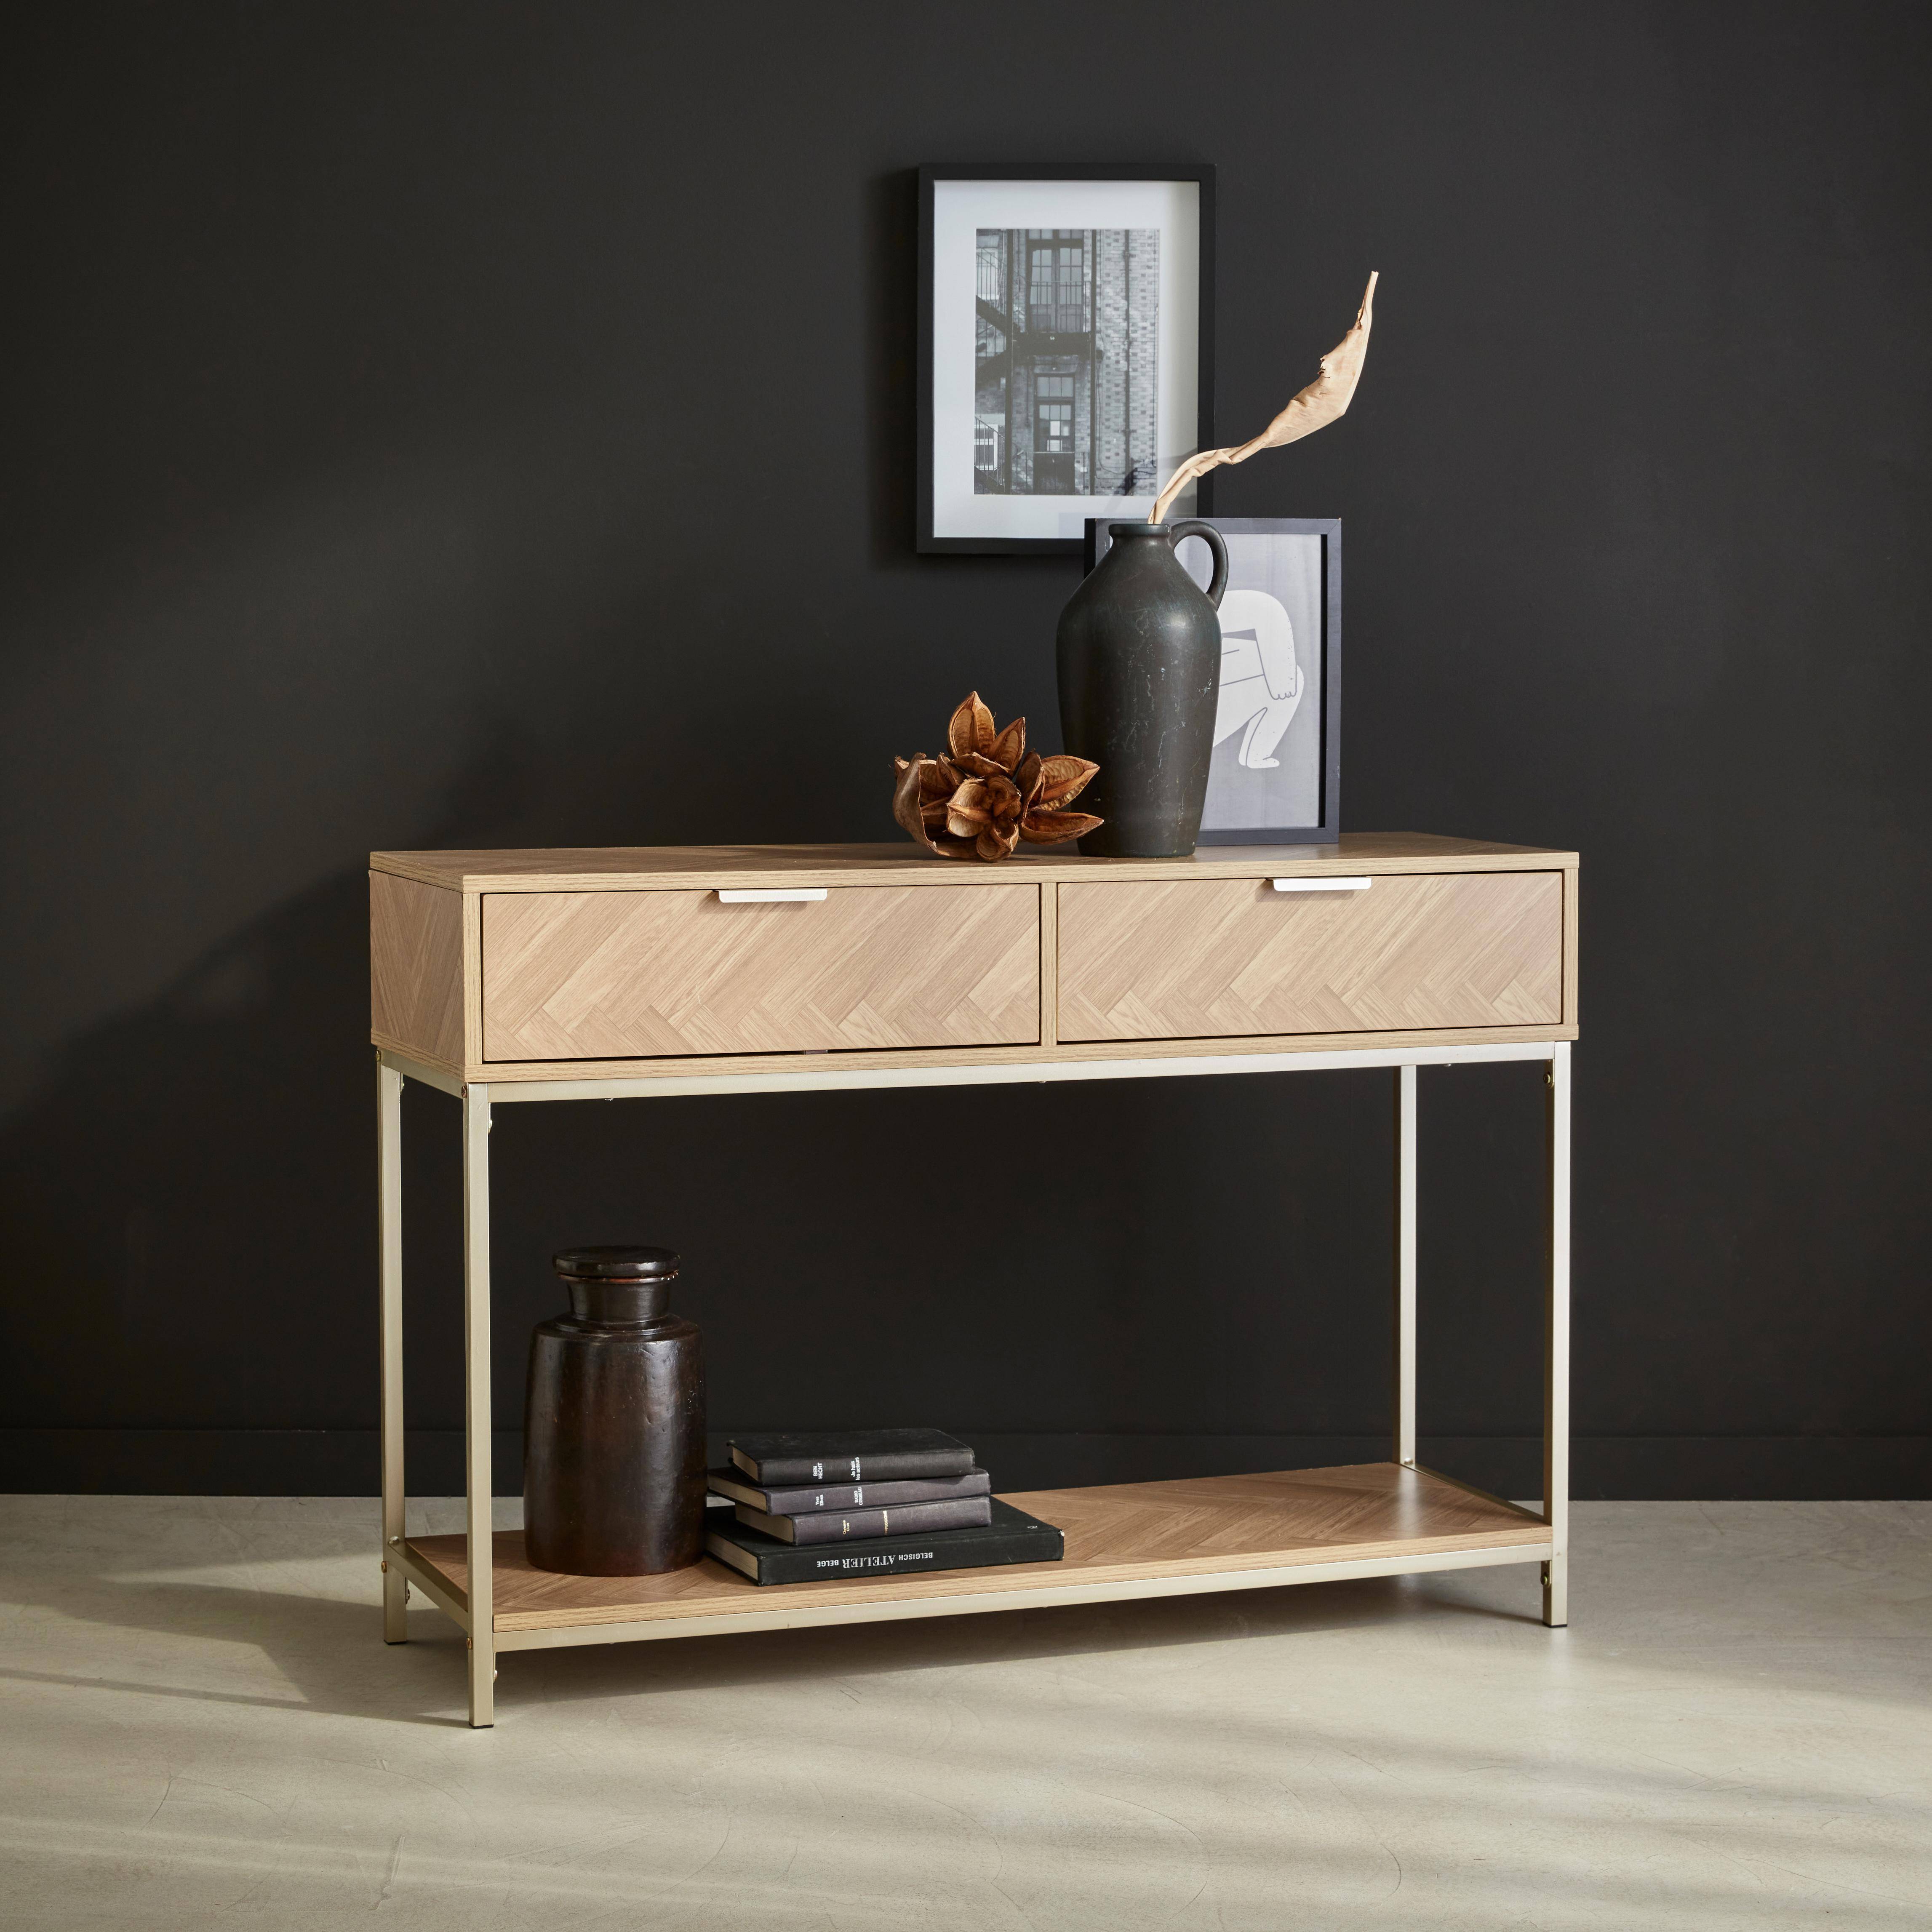 Herringbone hallway console table with 2 drawers, 110x35x75cm - Budapest - Natural Photo2